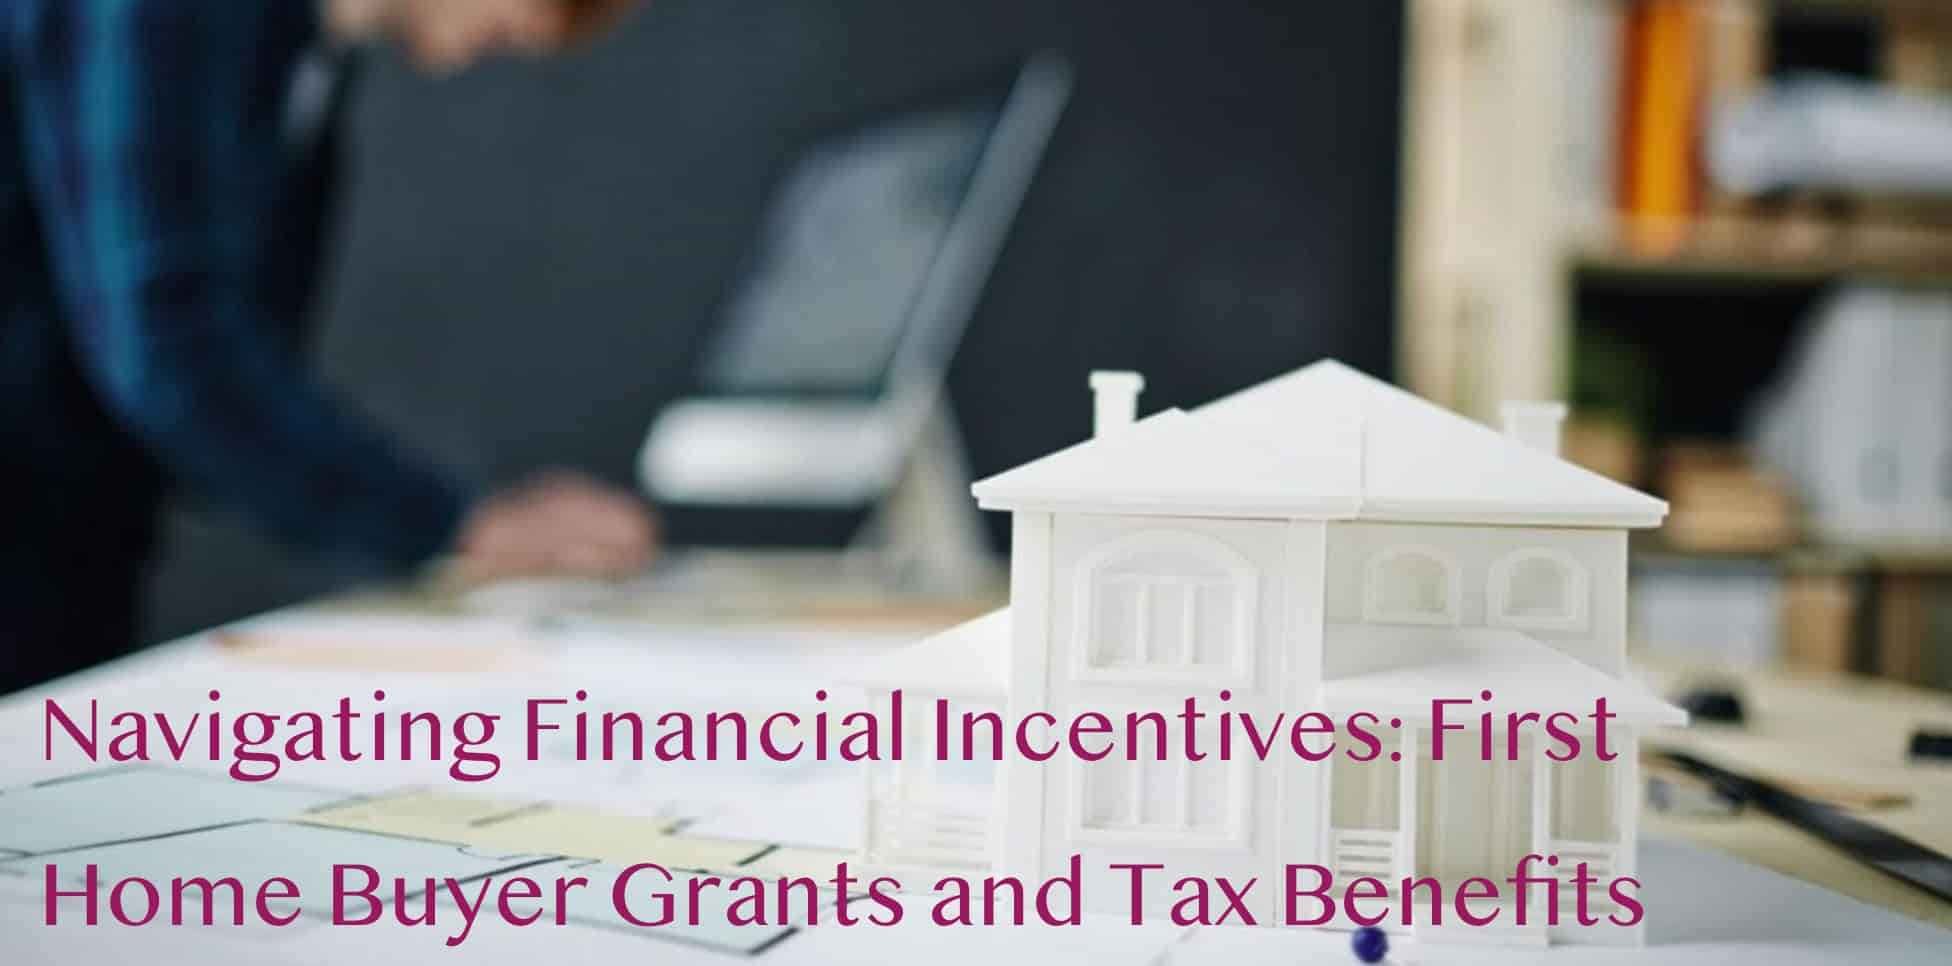 Navigating Financial Incentives: First Home Buyer Grants and Tax Benefits